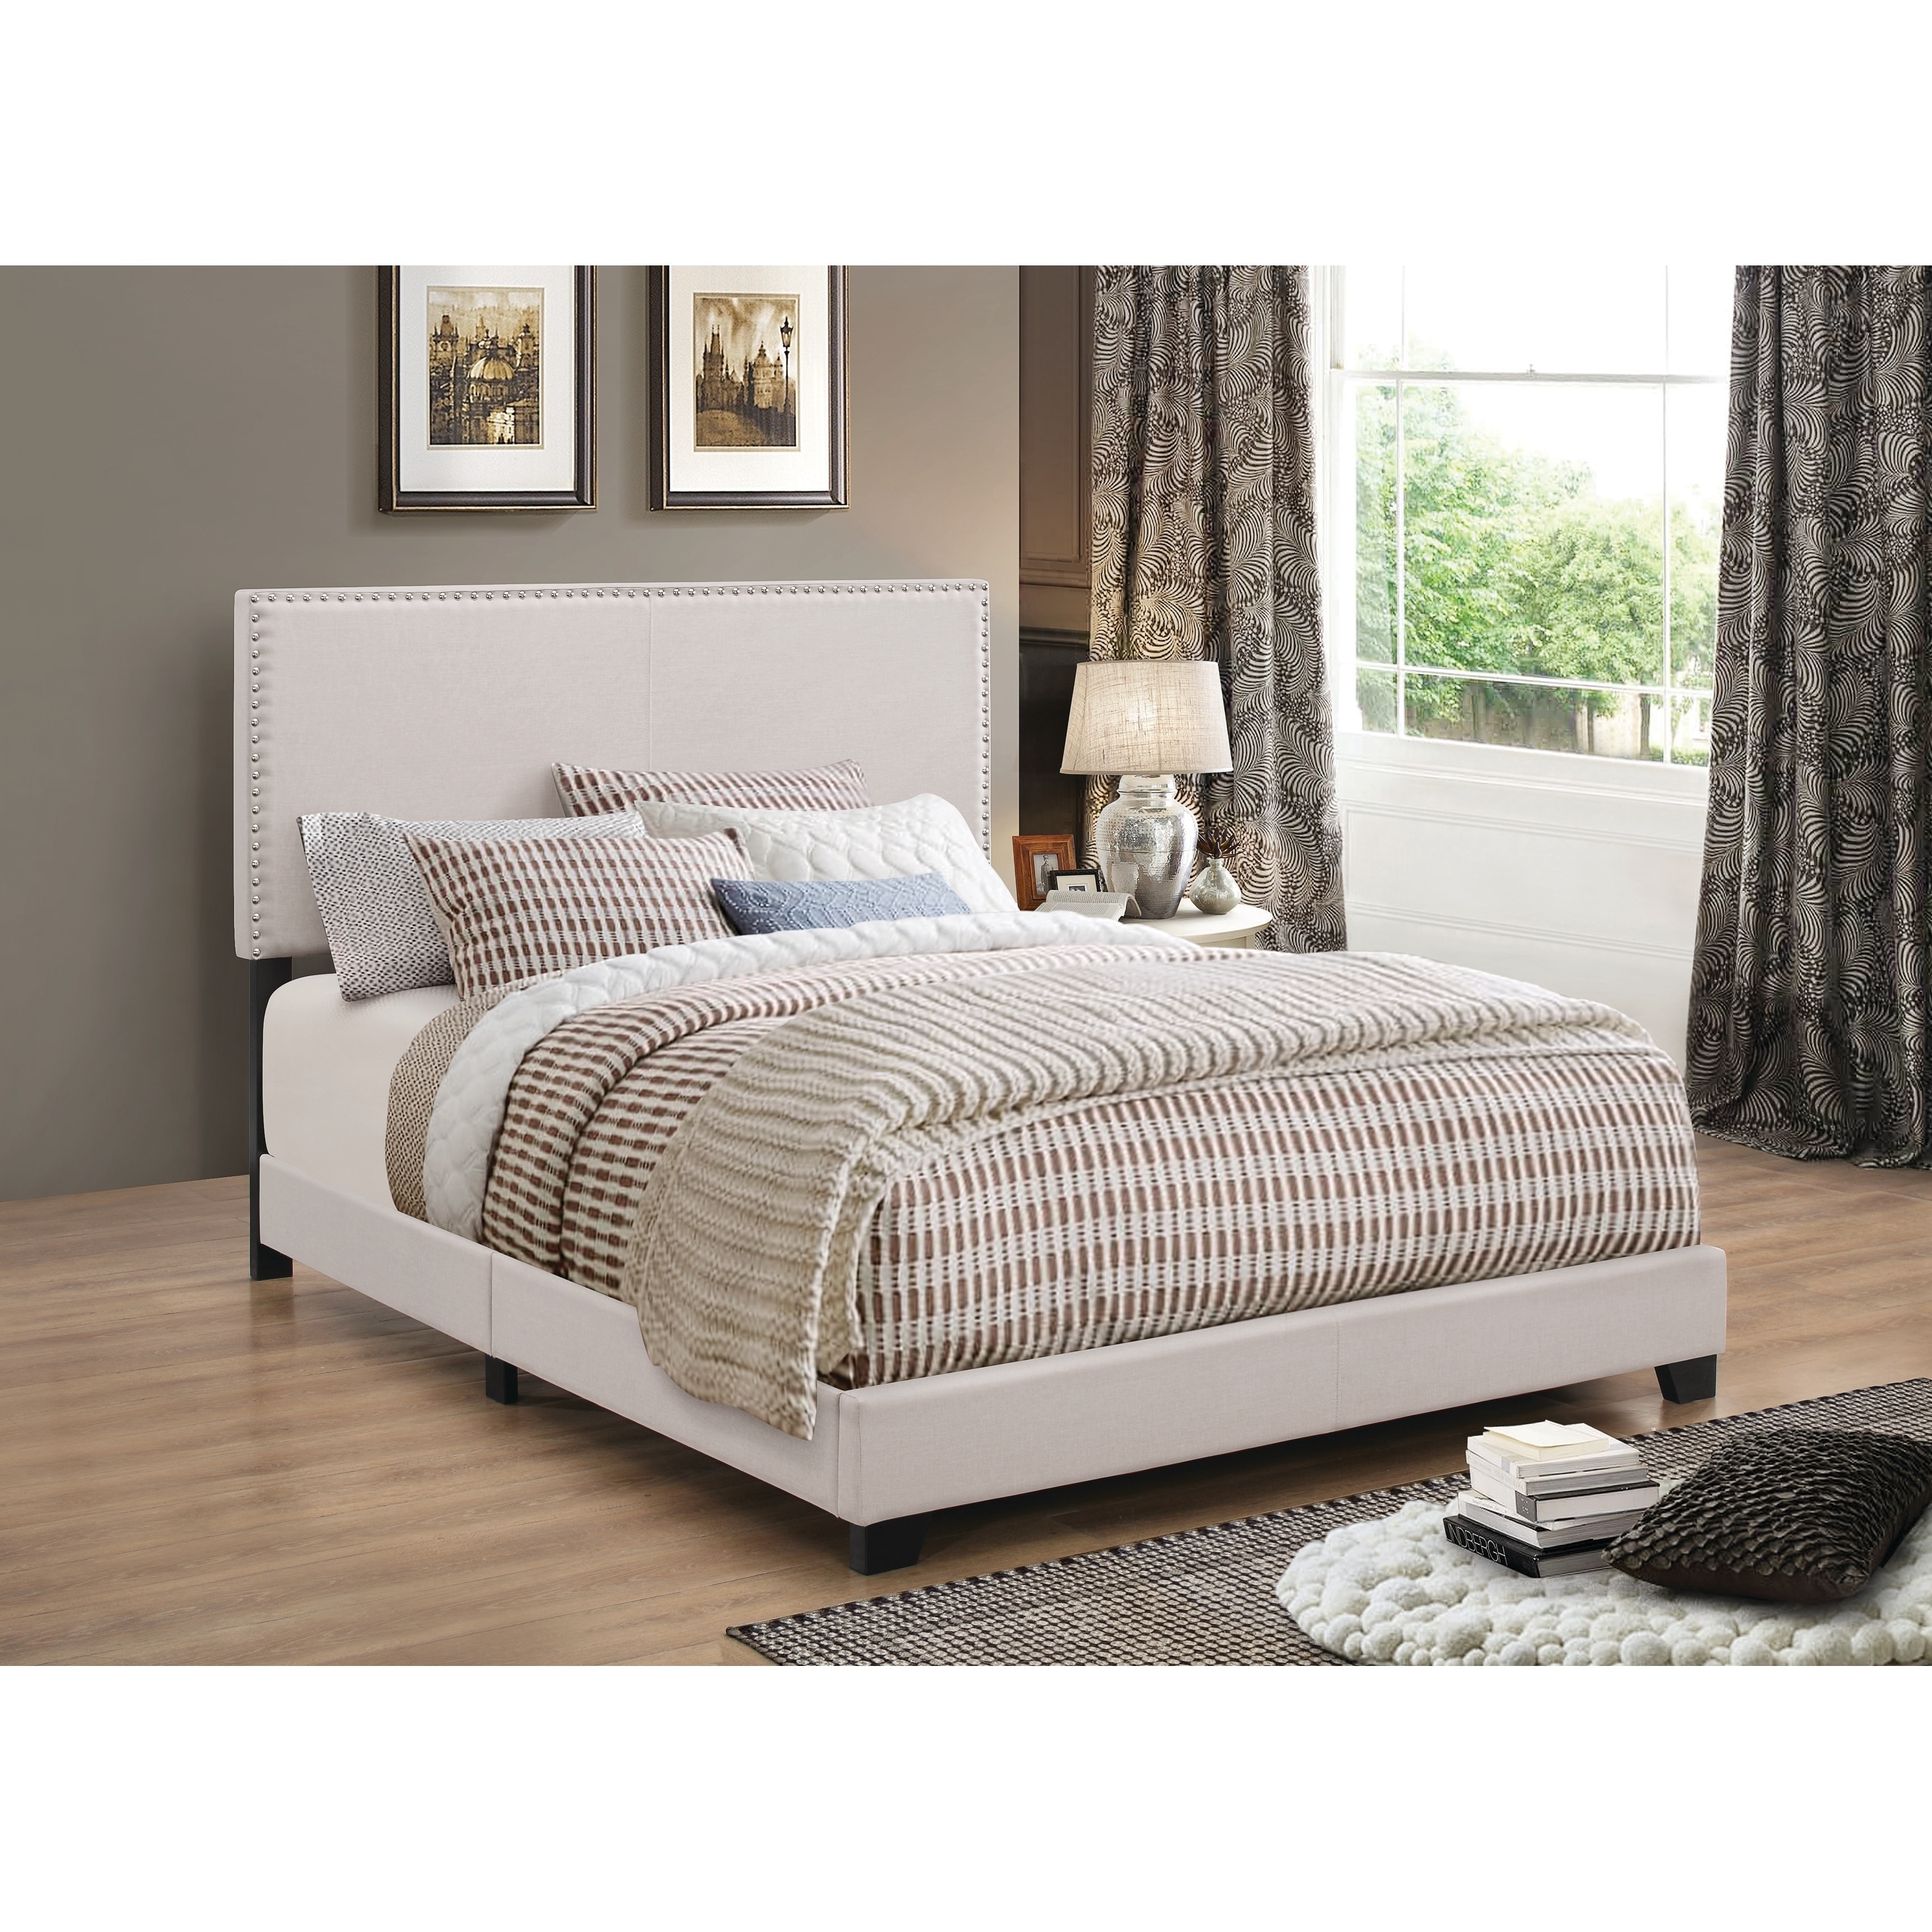 California King Beds For Less